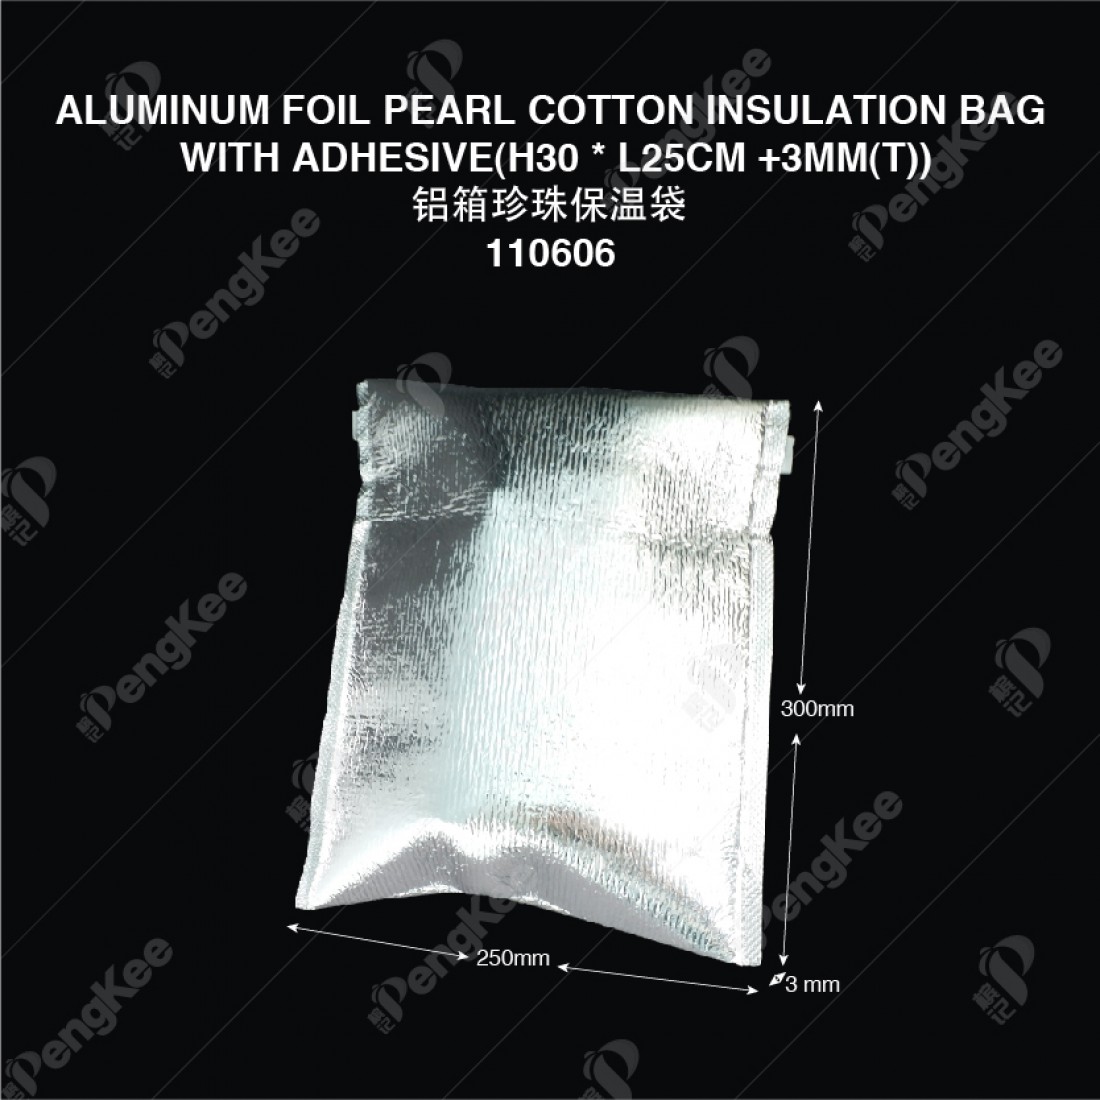 ALUMINUM FOIL PEARL COTTON INSULATION BAG WITH ADHESIVE(H30 * L25CM +3MM(T)) 铝箱珍珠保温袋 (50'S)